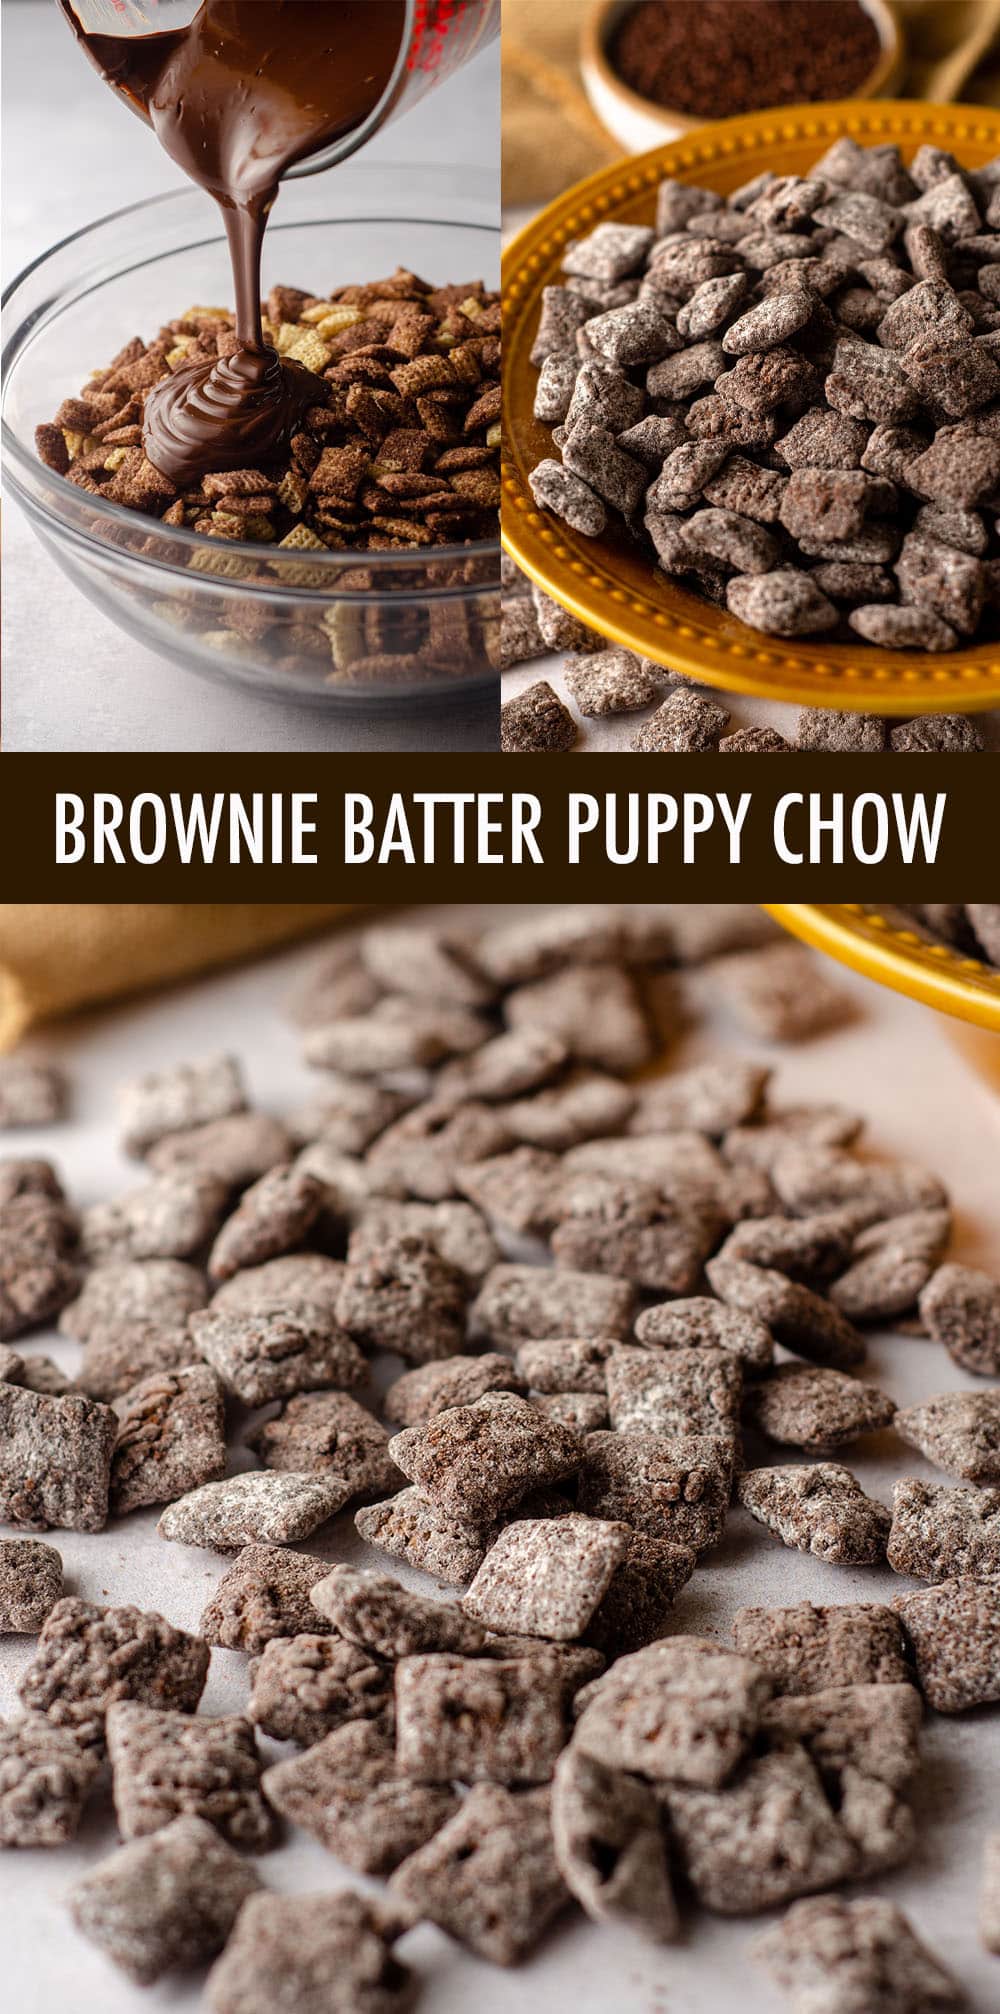 A rich chocolate take on classic puppy chow made to taste just like brownie batter. via @frshaprilflours